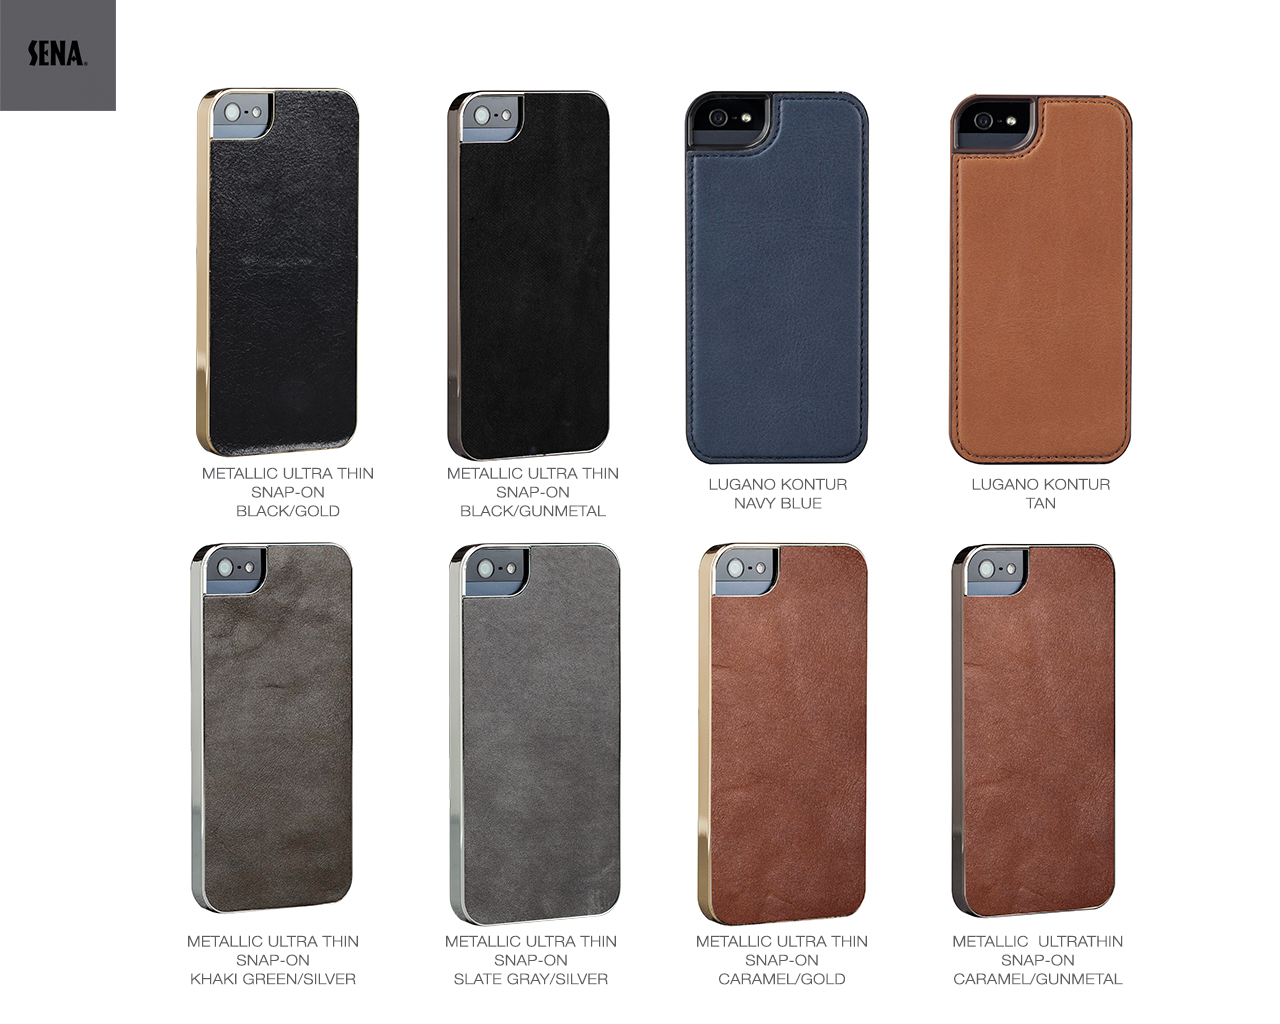 Roundup of our latest cases for iPhone 5s and 5c